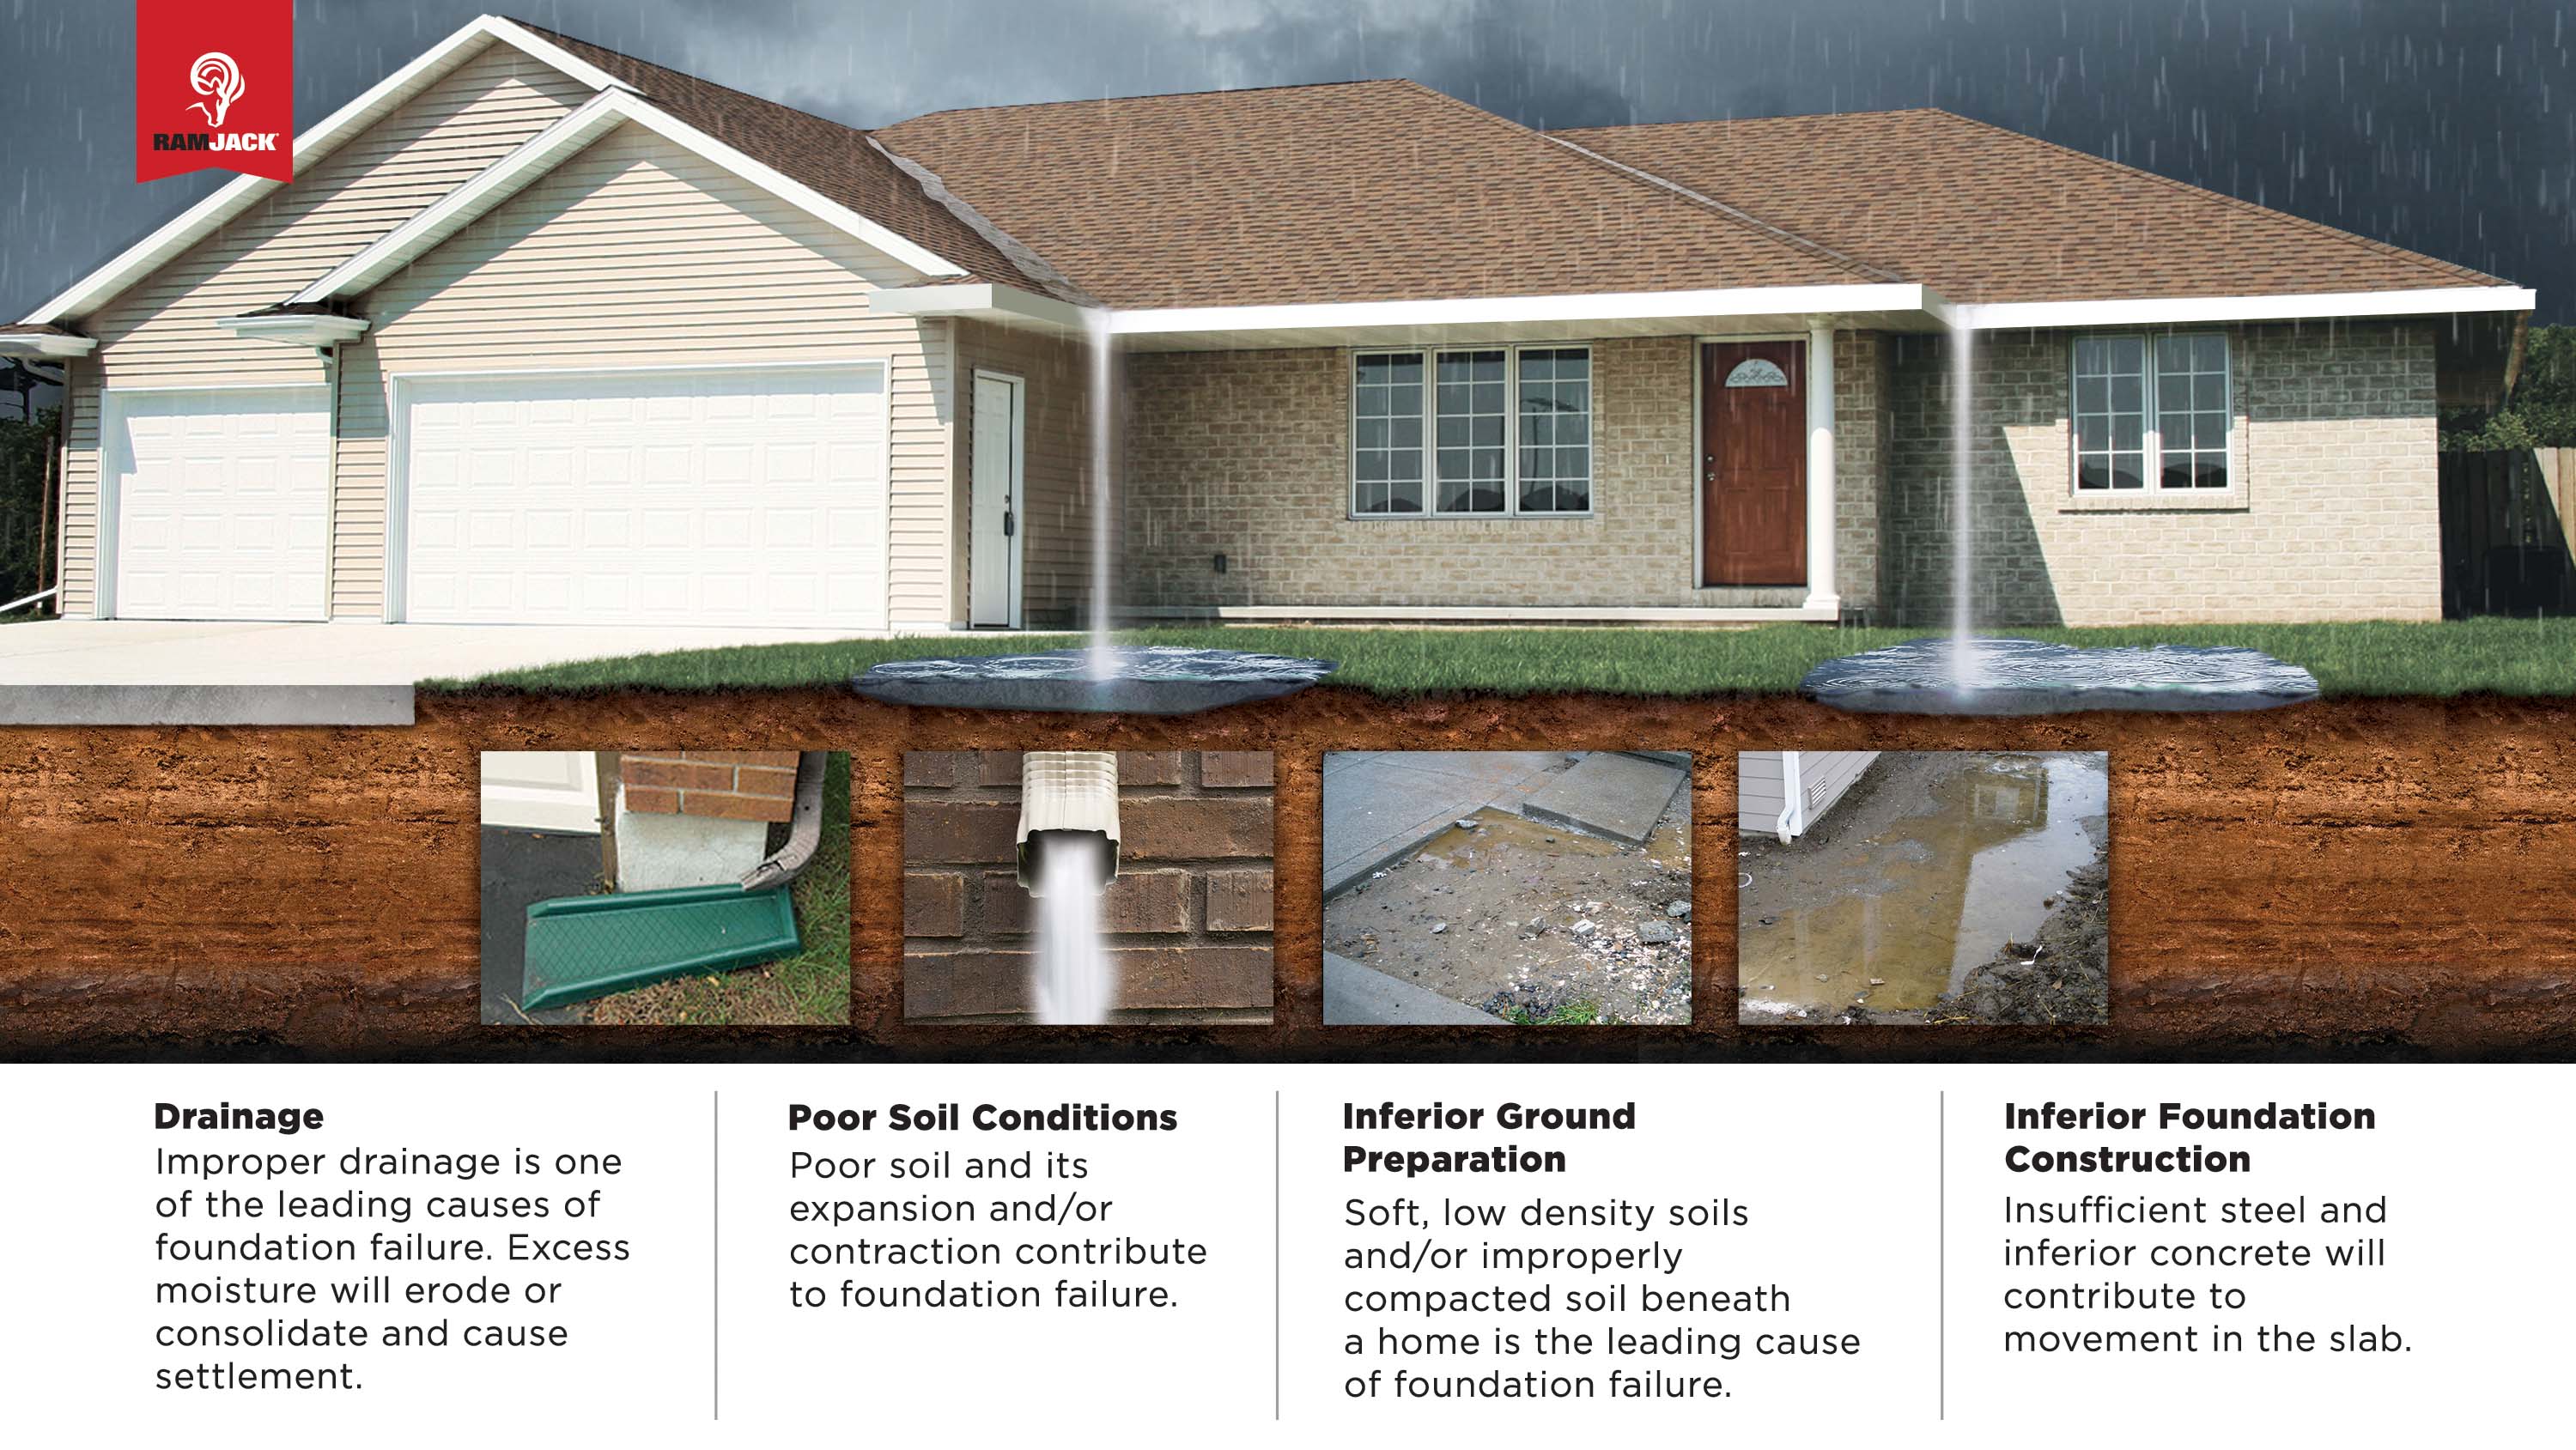 House infographic: Drainage, poor soil conditions, inferior ground preparation, inferior foundation construction